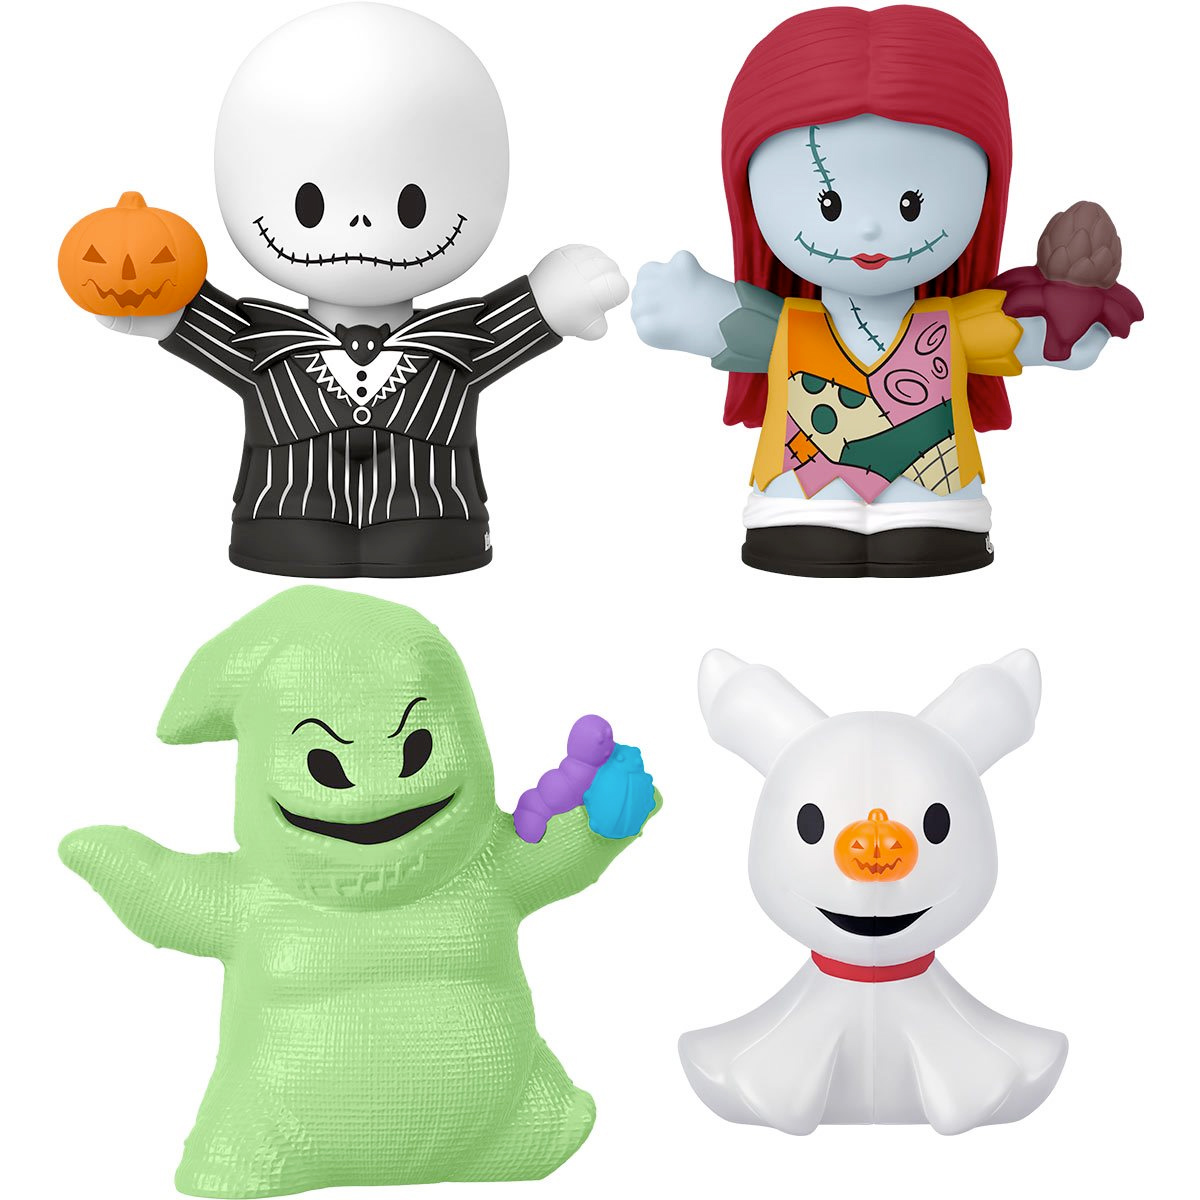 Bonecos Little People Collector The Nightmare Before Christmas 30 Anos (Fisher-Price)